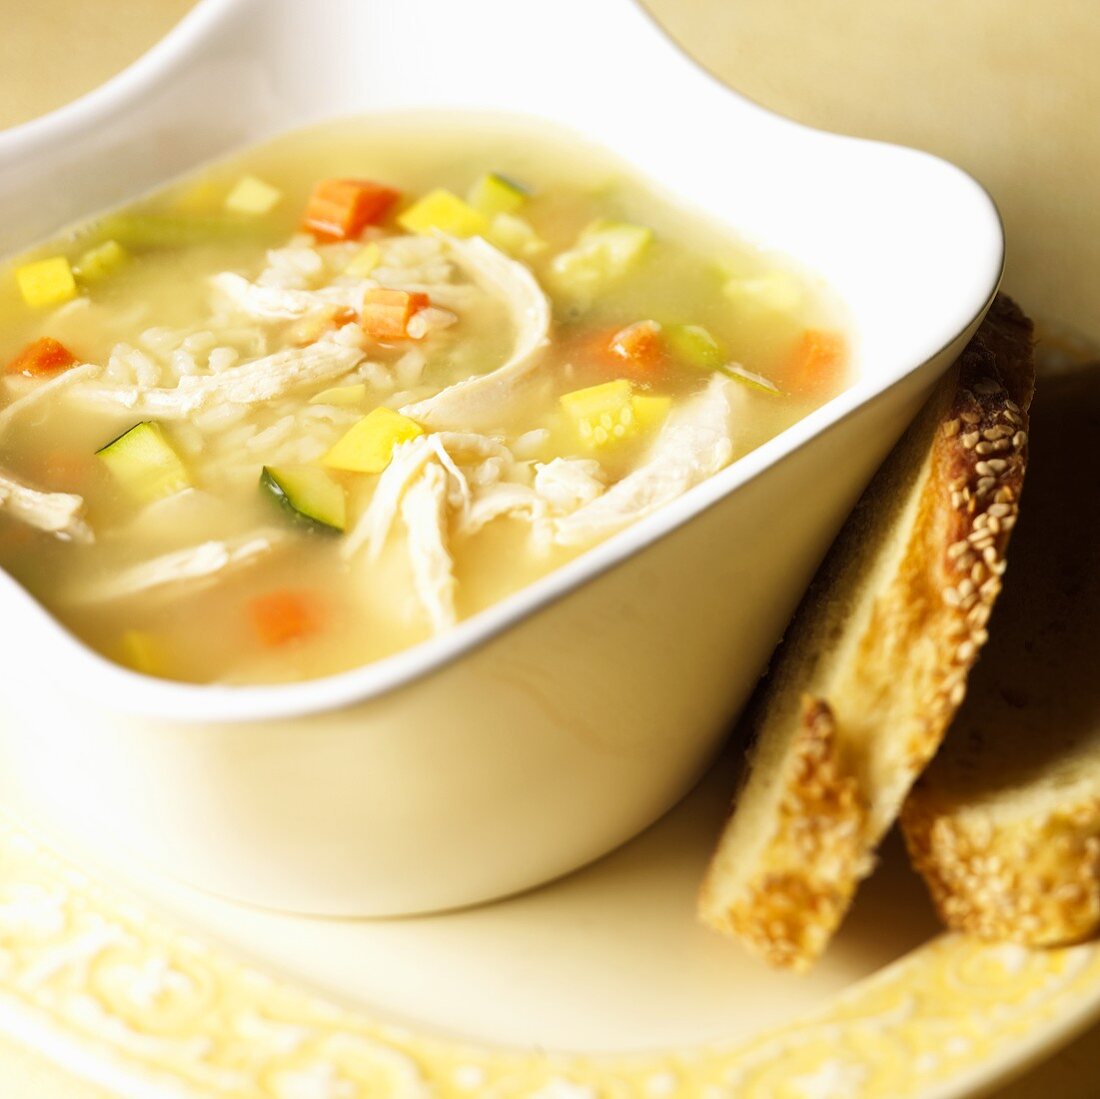 Bowl of Chicken and Rice Soup; Slices of Bread